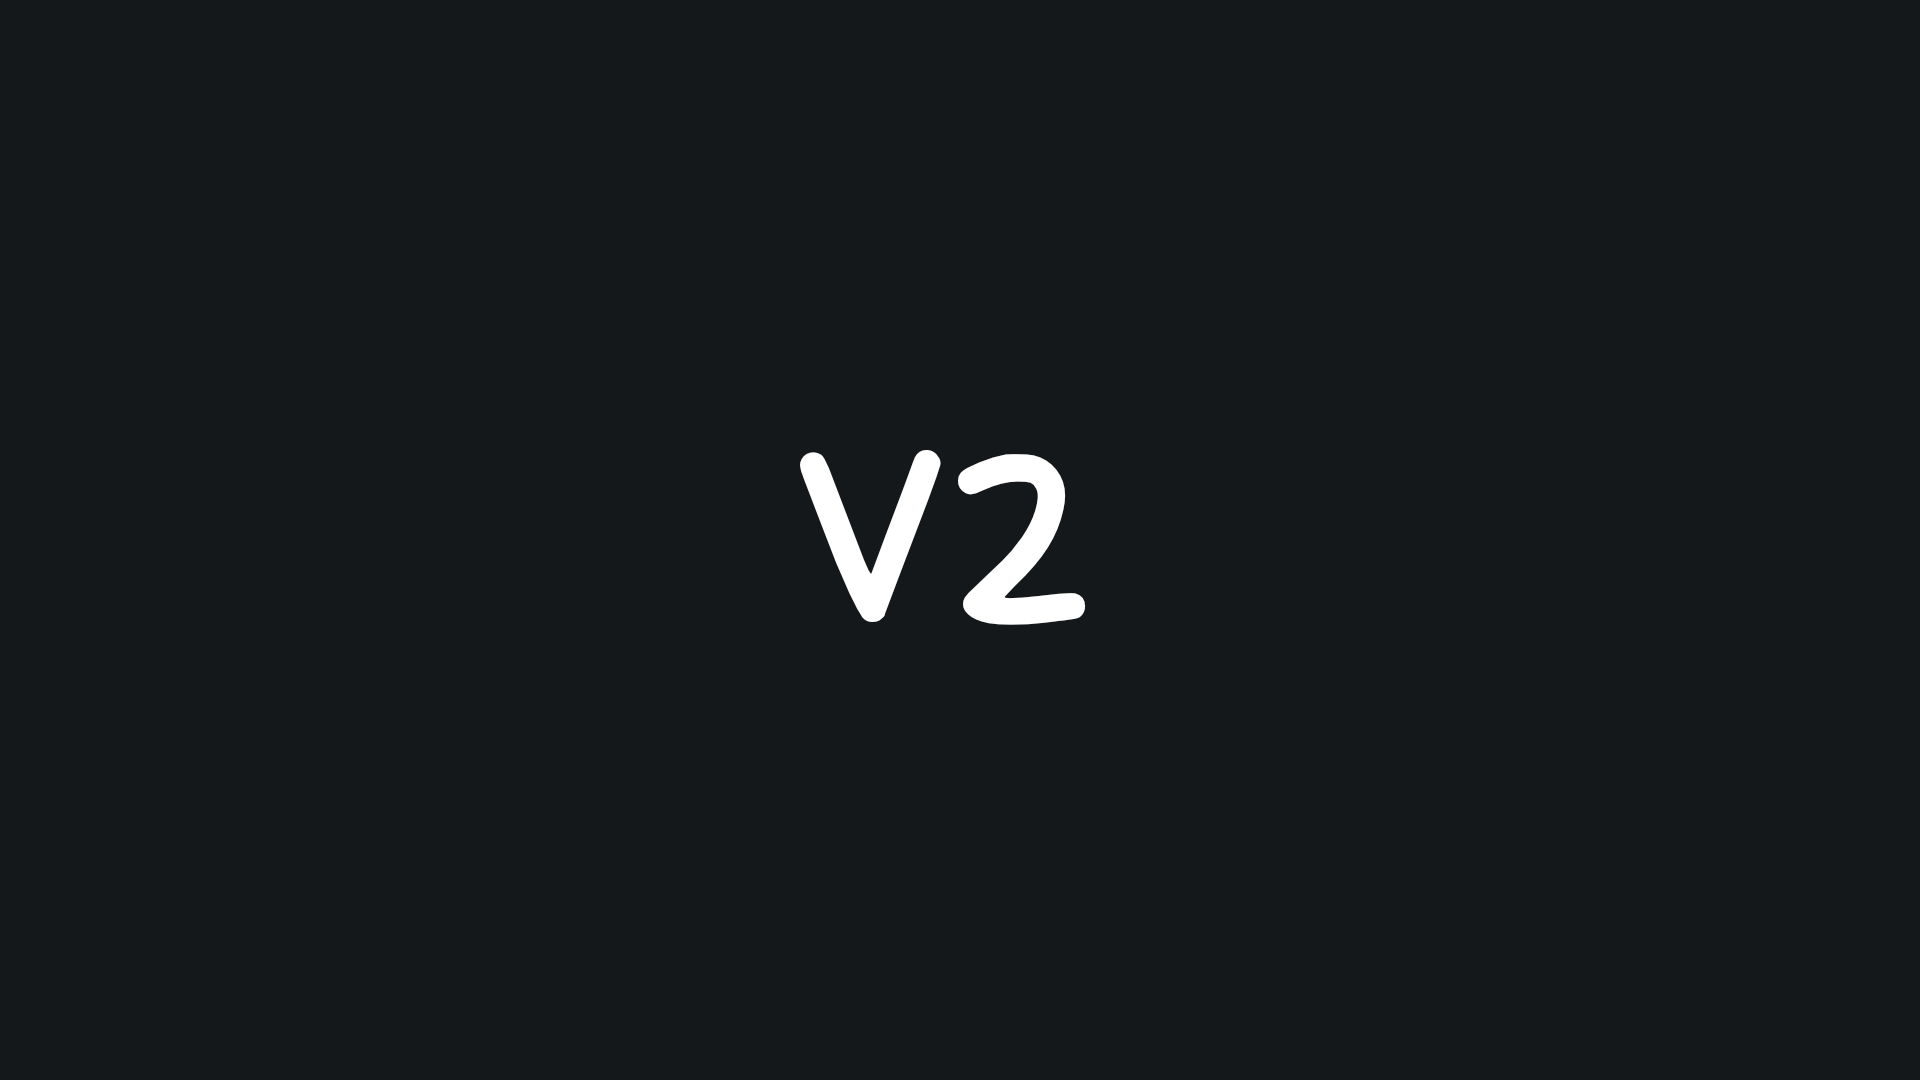 "V2" capitalized at the center in a black background.